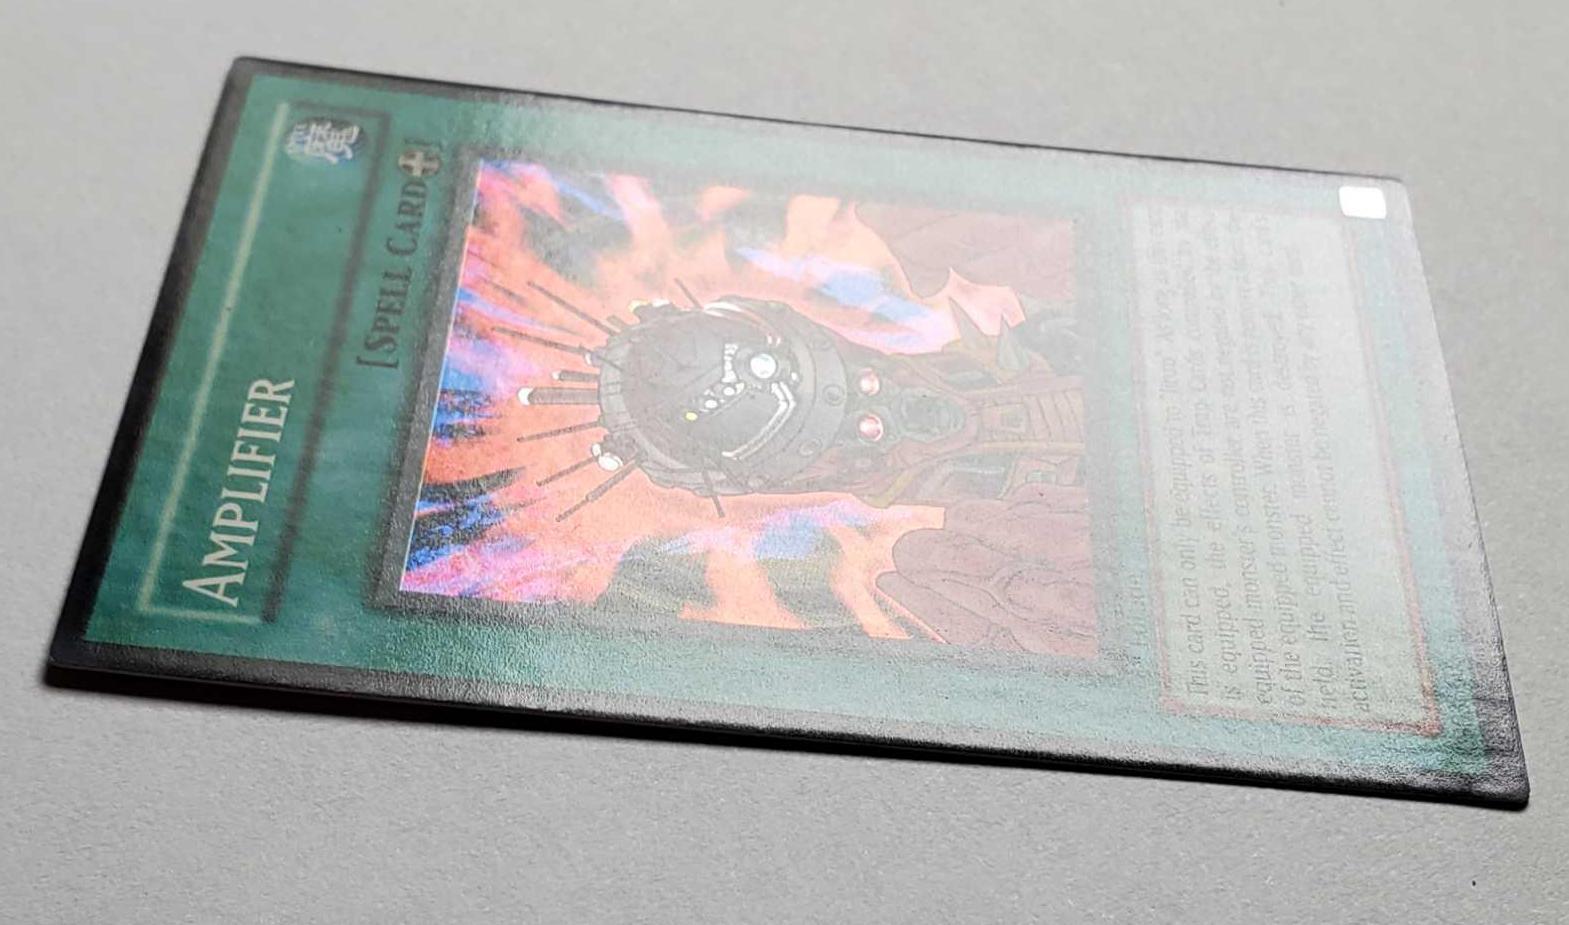 8 Secret, Ultra and Super Rare First Edition Yu-Gi-Oh! 2004 Ancient Sanctuary AST Trading Cards